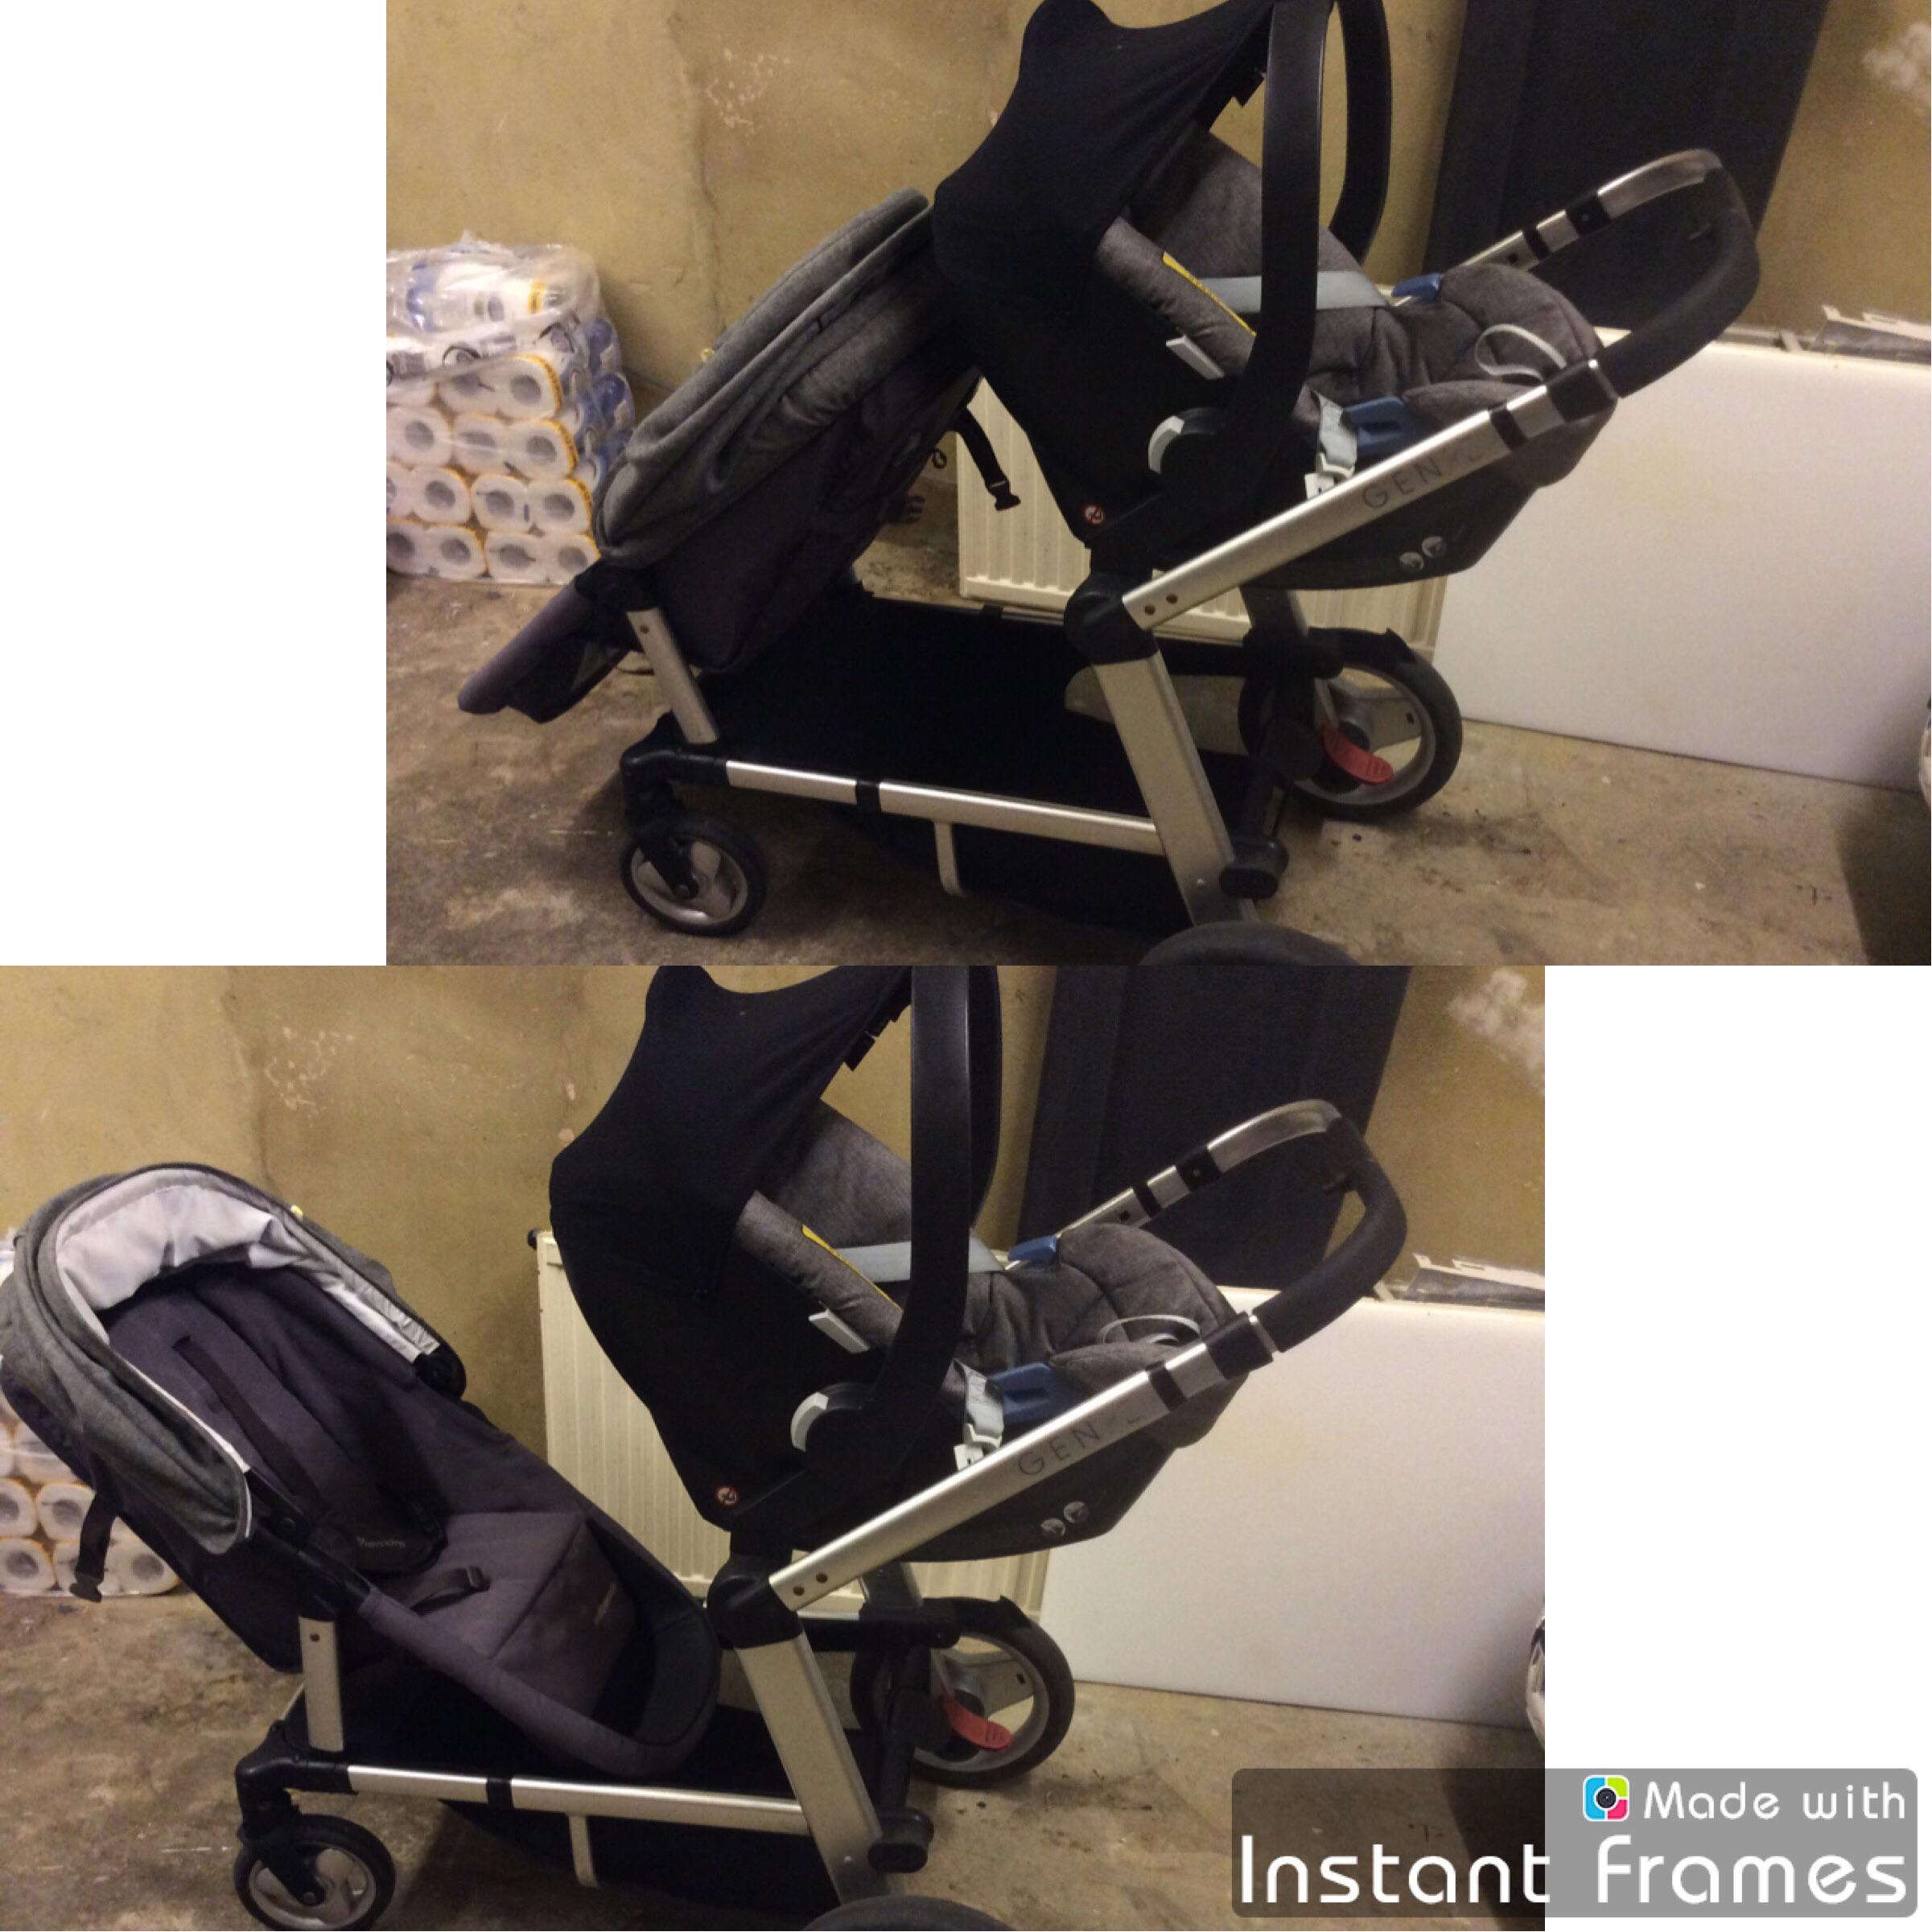 mothercare travel system raincover